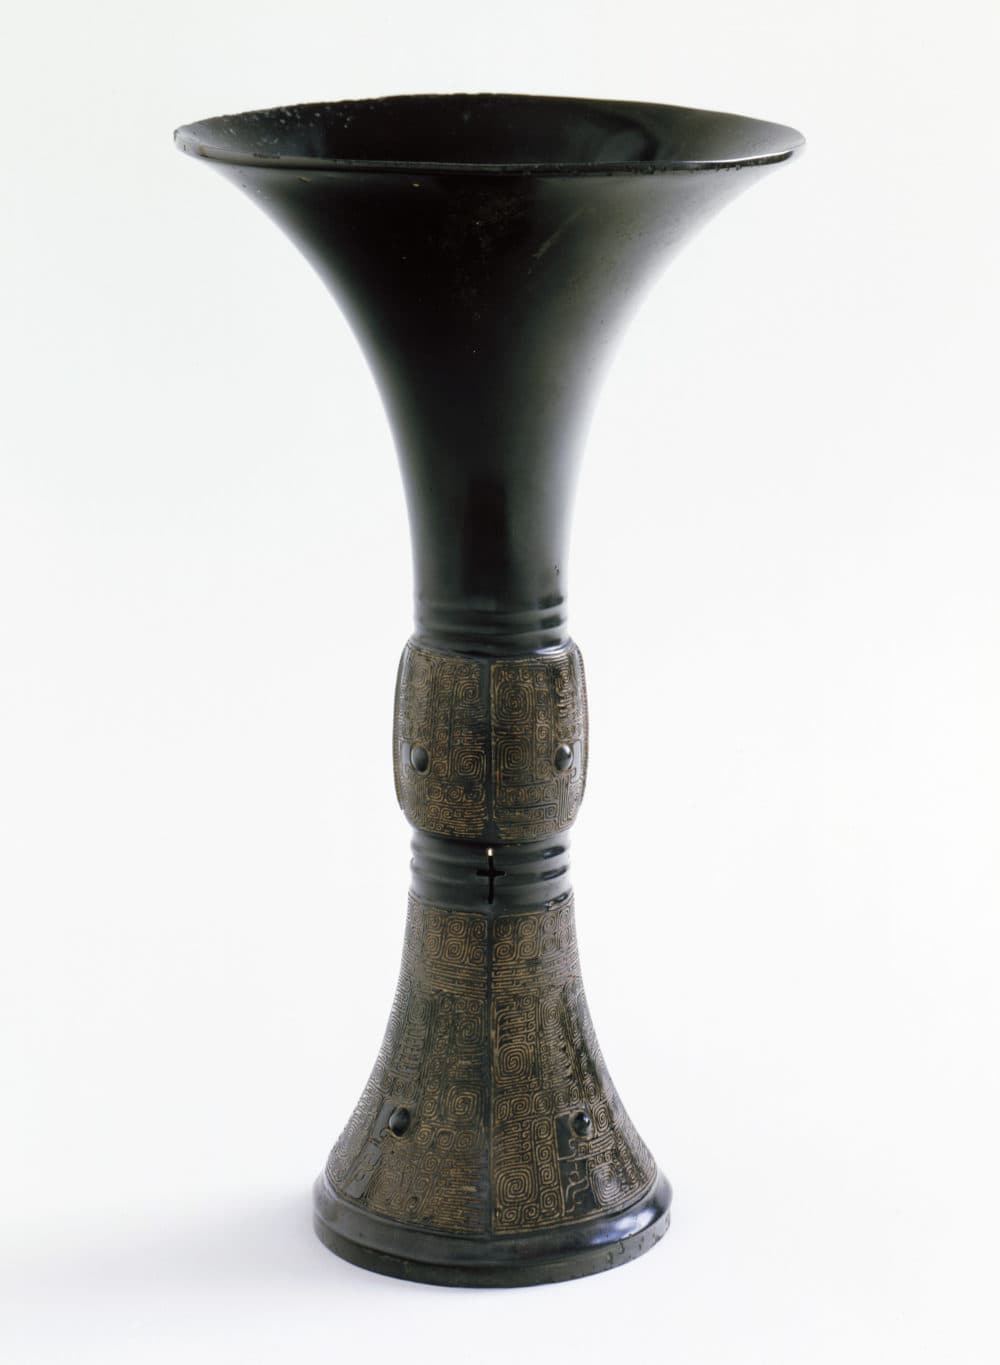 An ancient Chinese beaker (or gu). Metal, 26.5 x 15.6 cm (10 7/16 x 6 1/8 in.) overall. (Courtesy Isabella Stewart Gardner Museum)